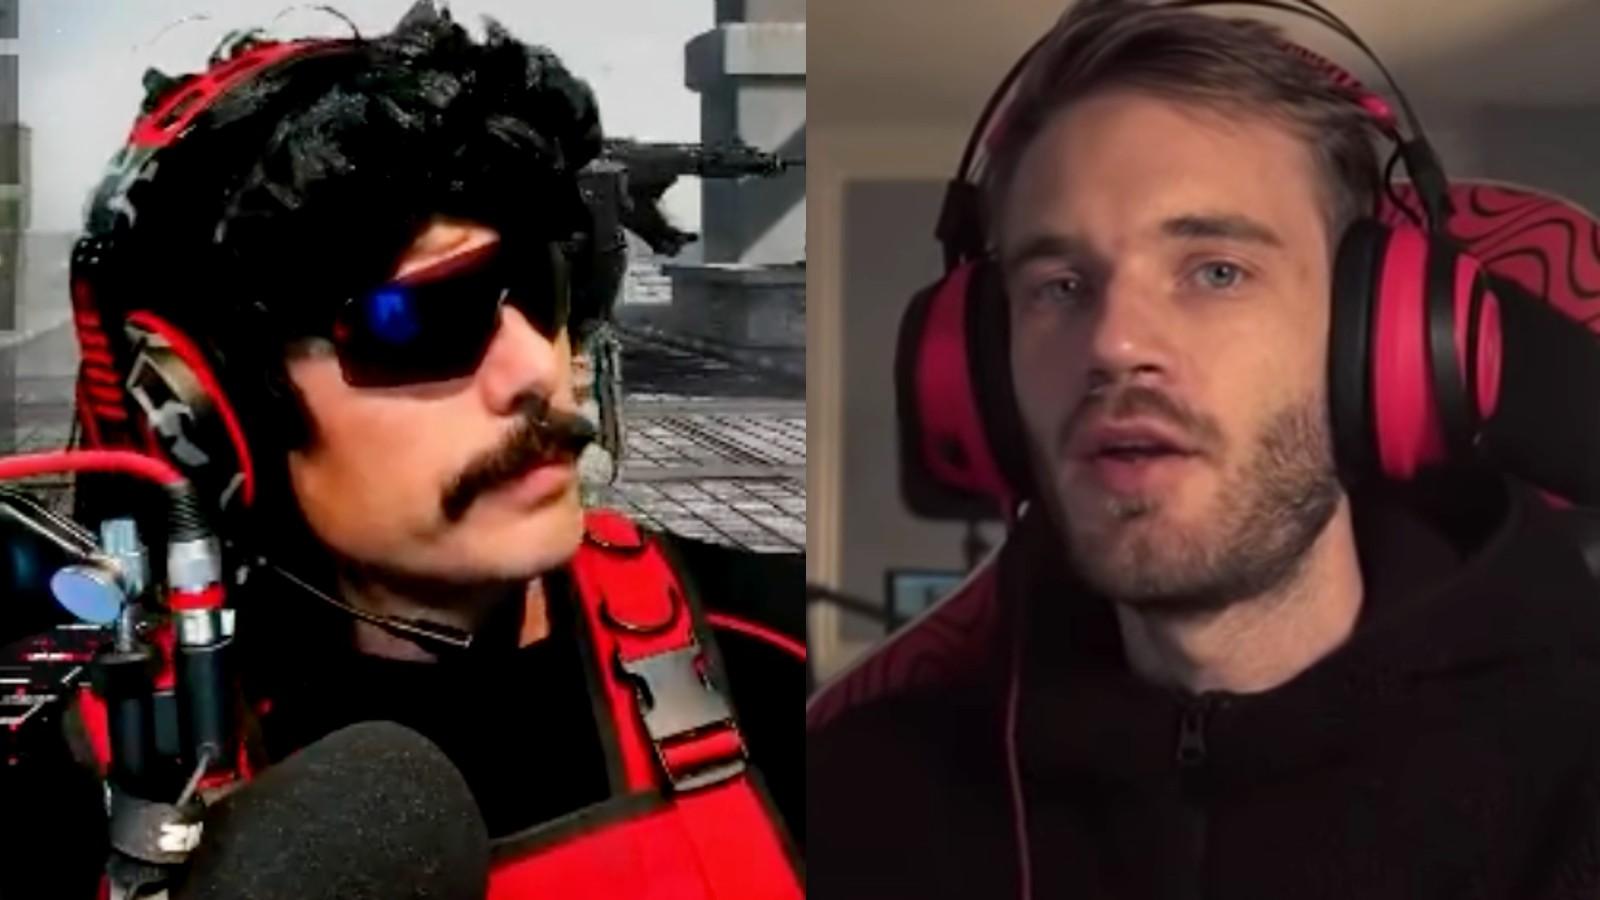 Image of Dr Disrespect next to image of PewDiePie